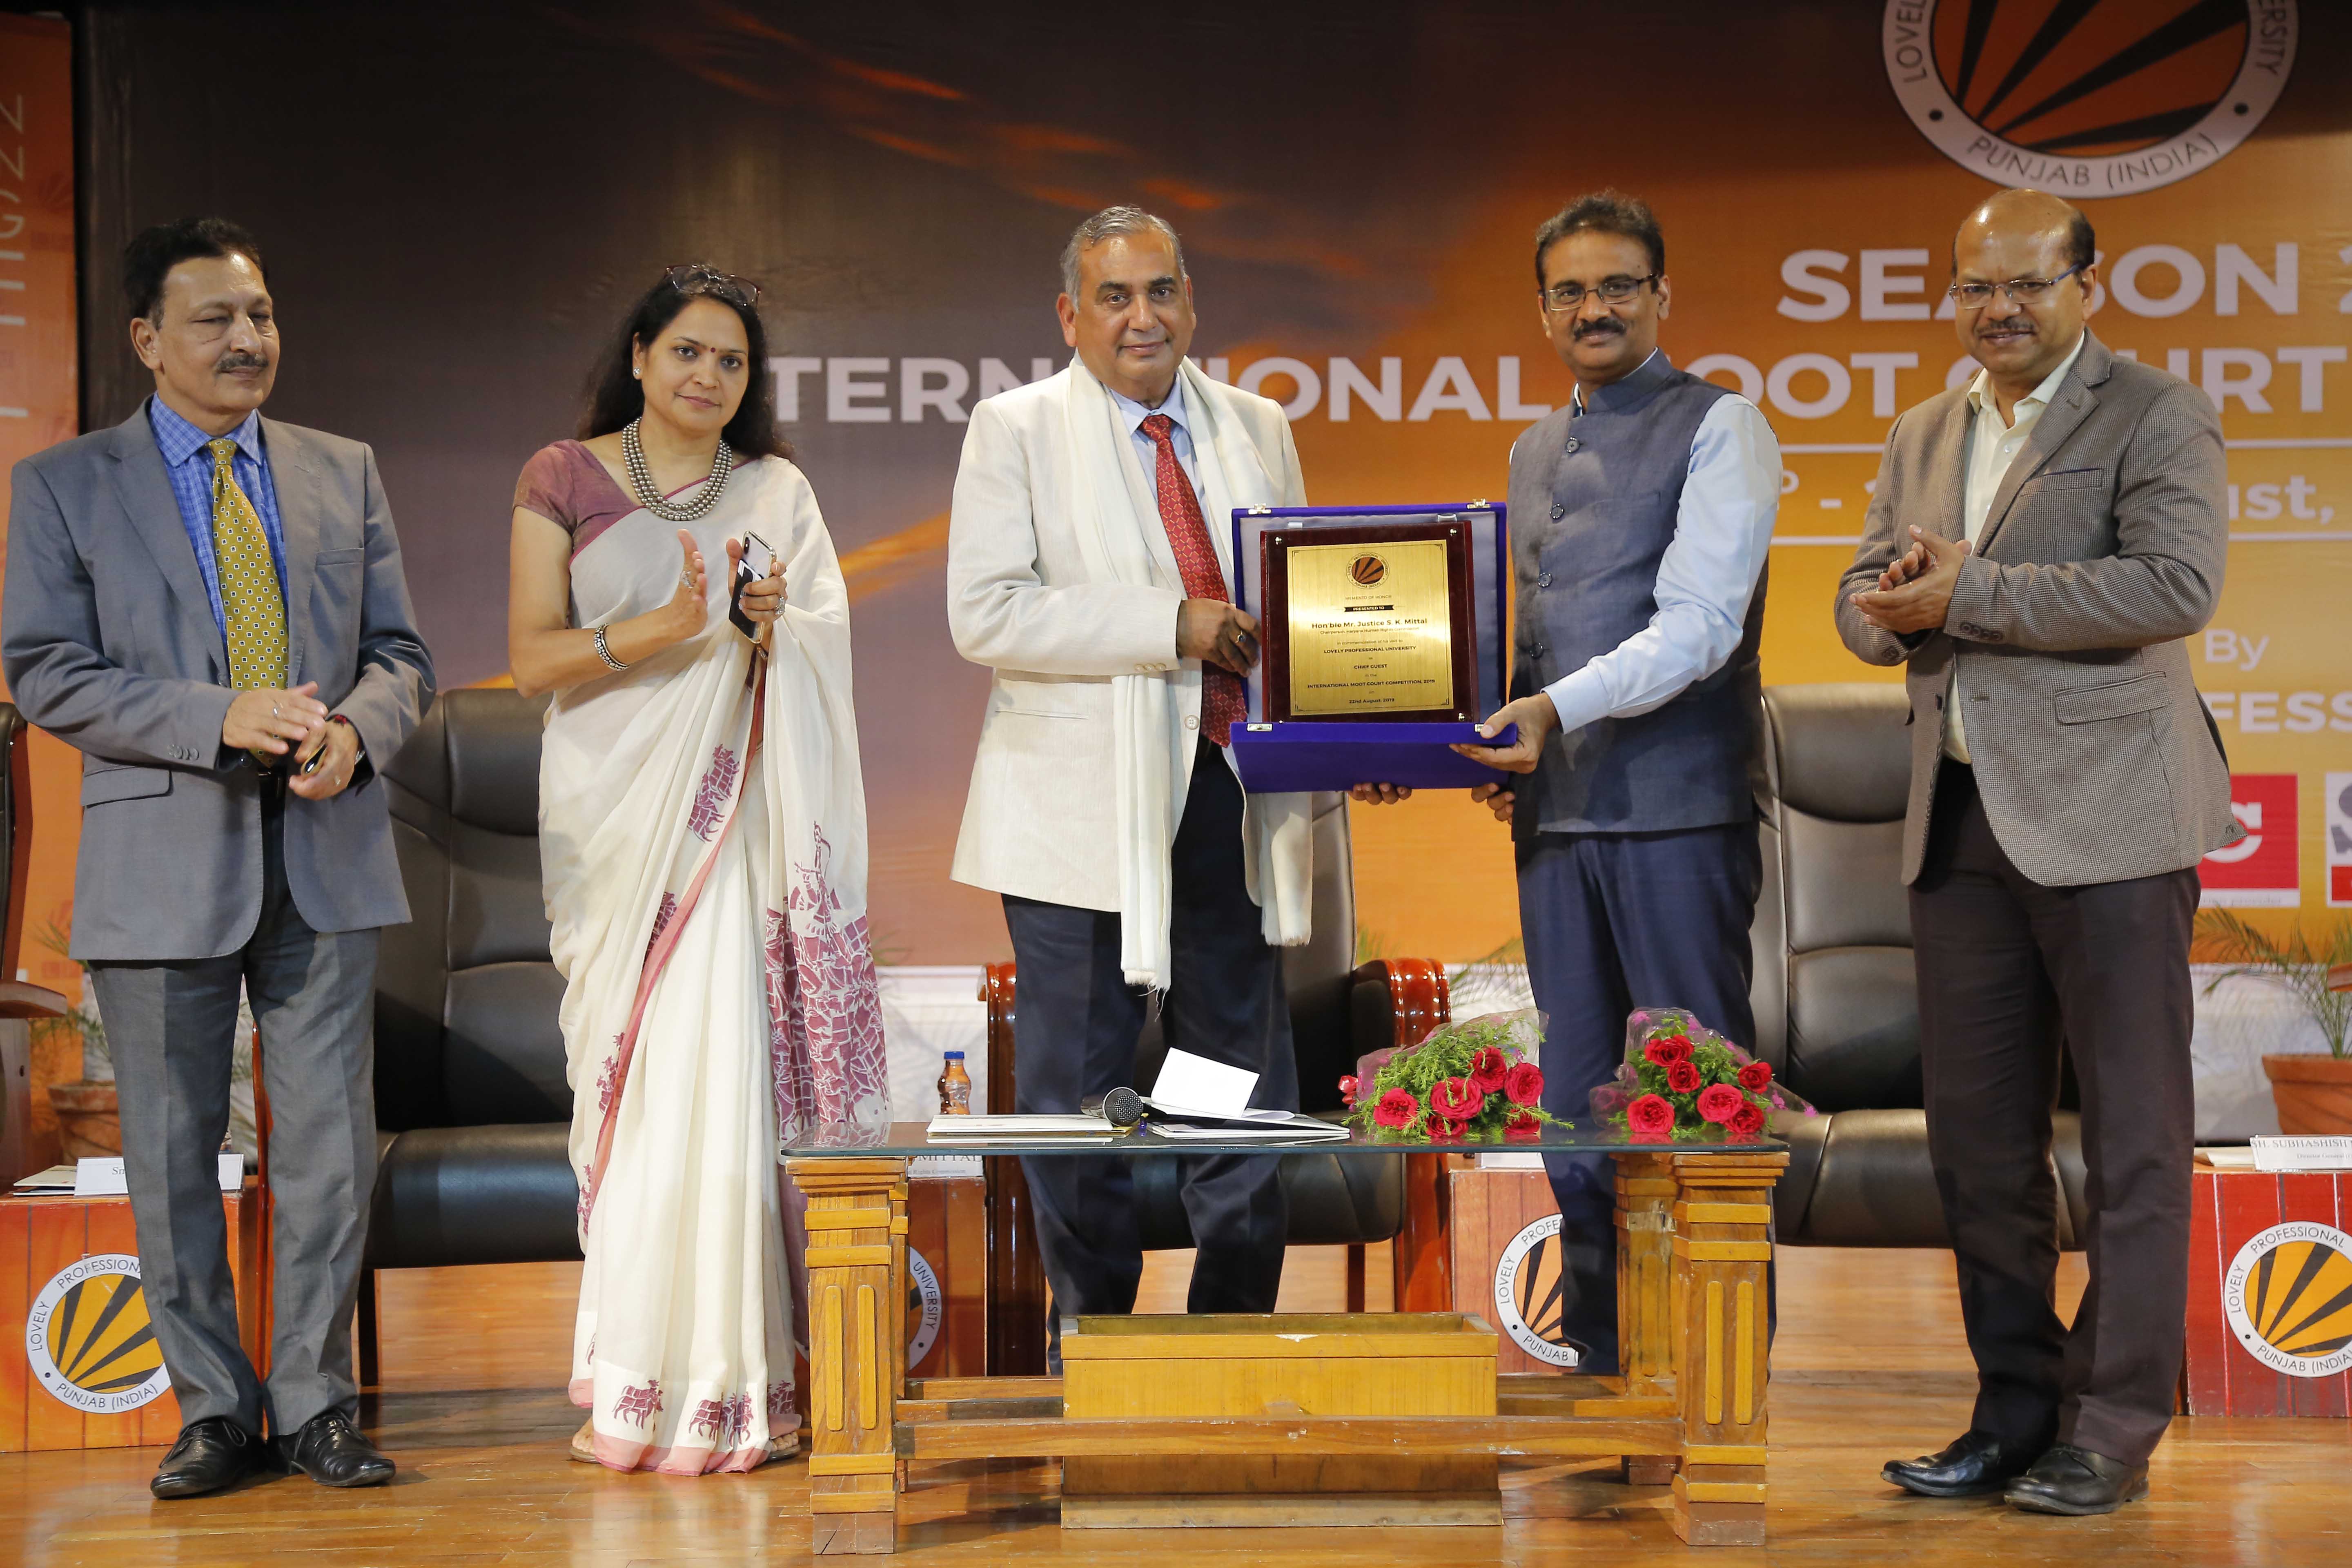 LPU Chancellor Mr Ashok Mittal honouring Former Chief Justice Sh SK Mittal during International Moot Court Competition at LPU